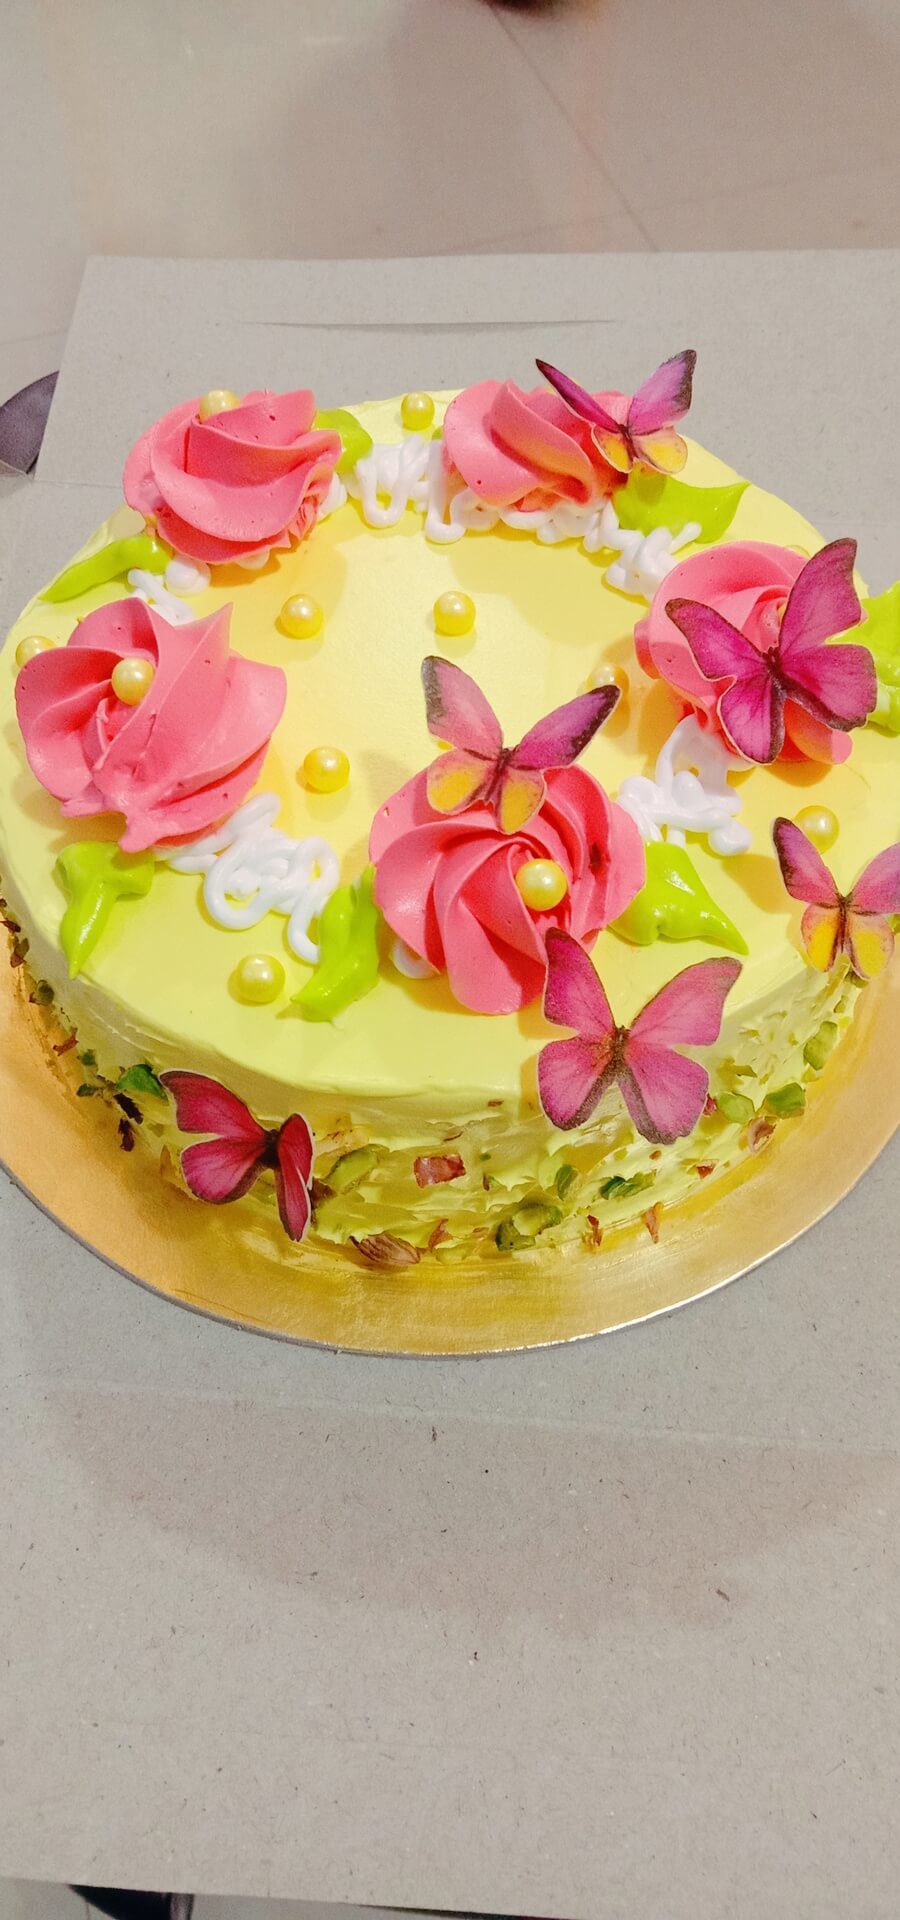 Butterfly Effect Cake Designs, Images, Price Near Me